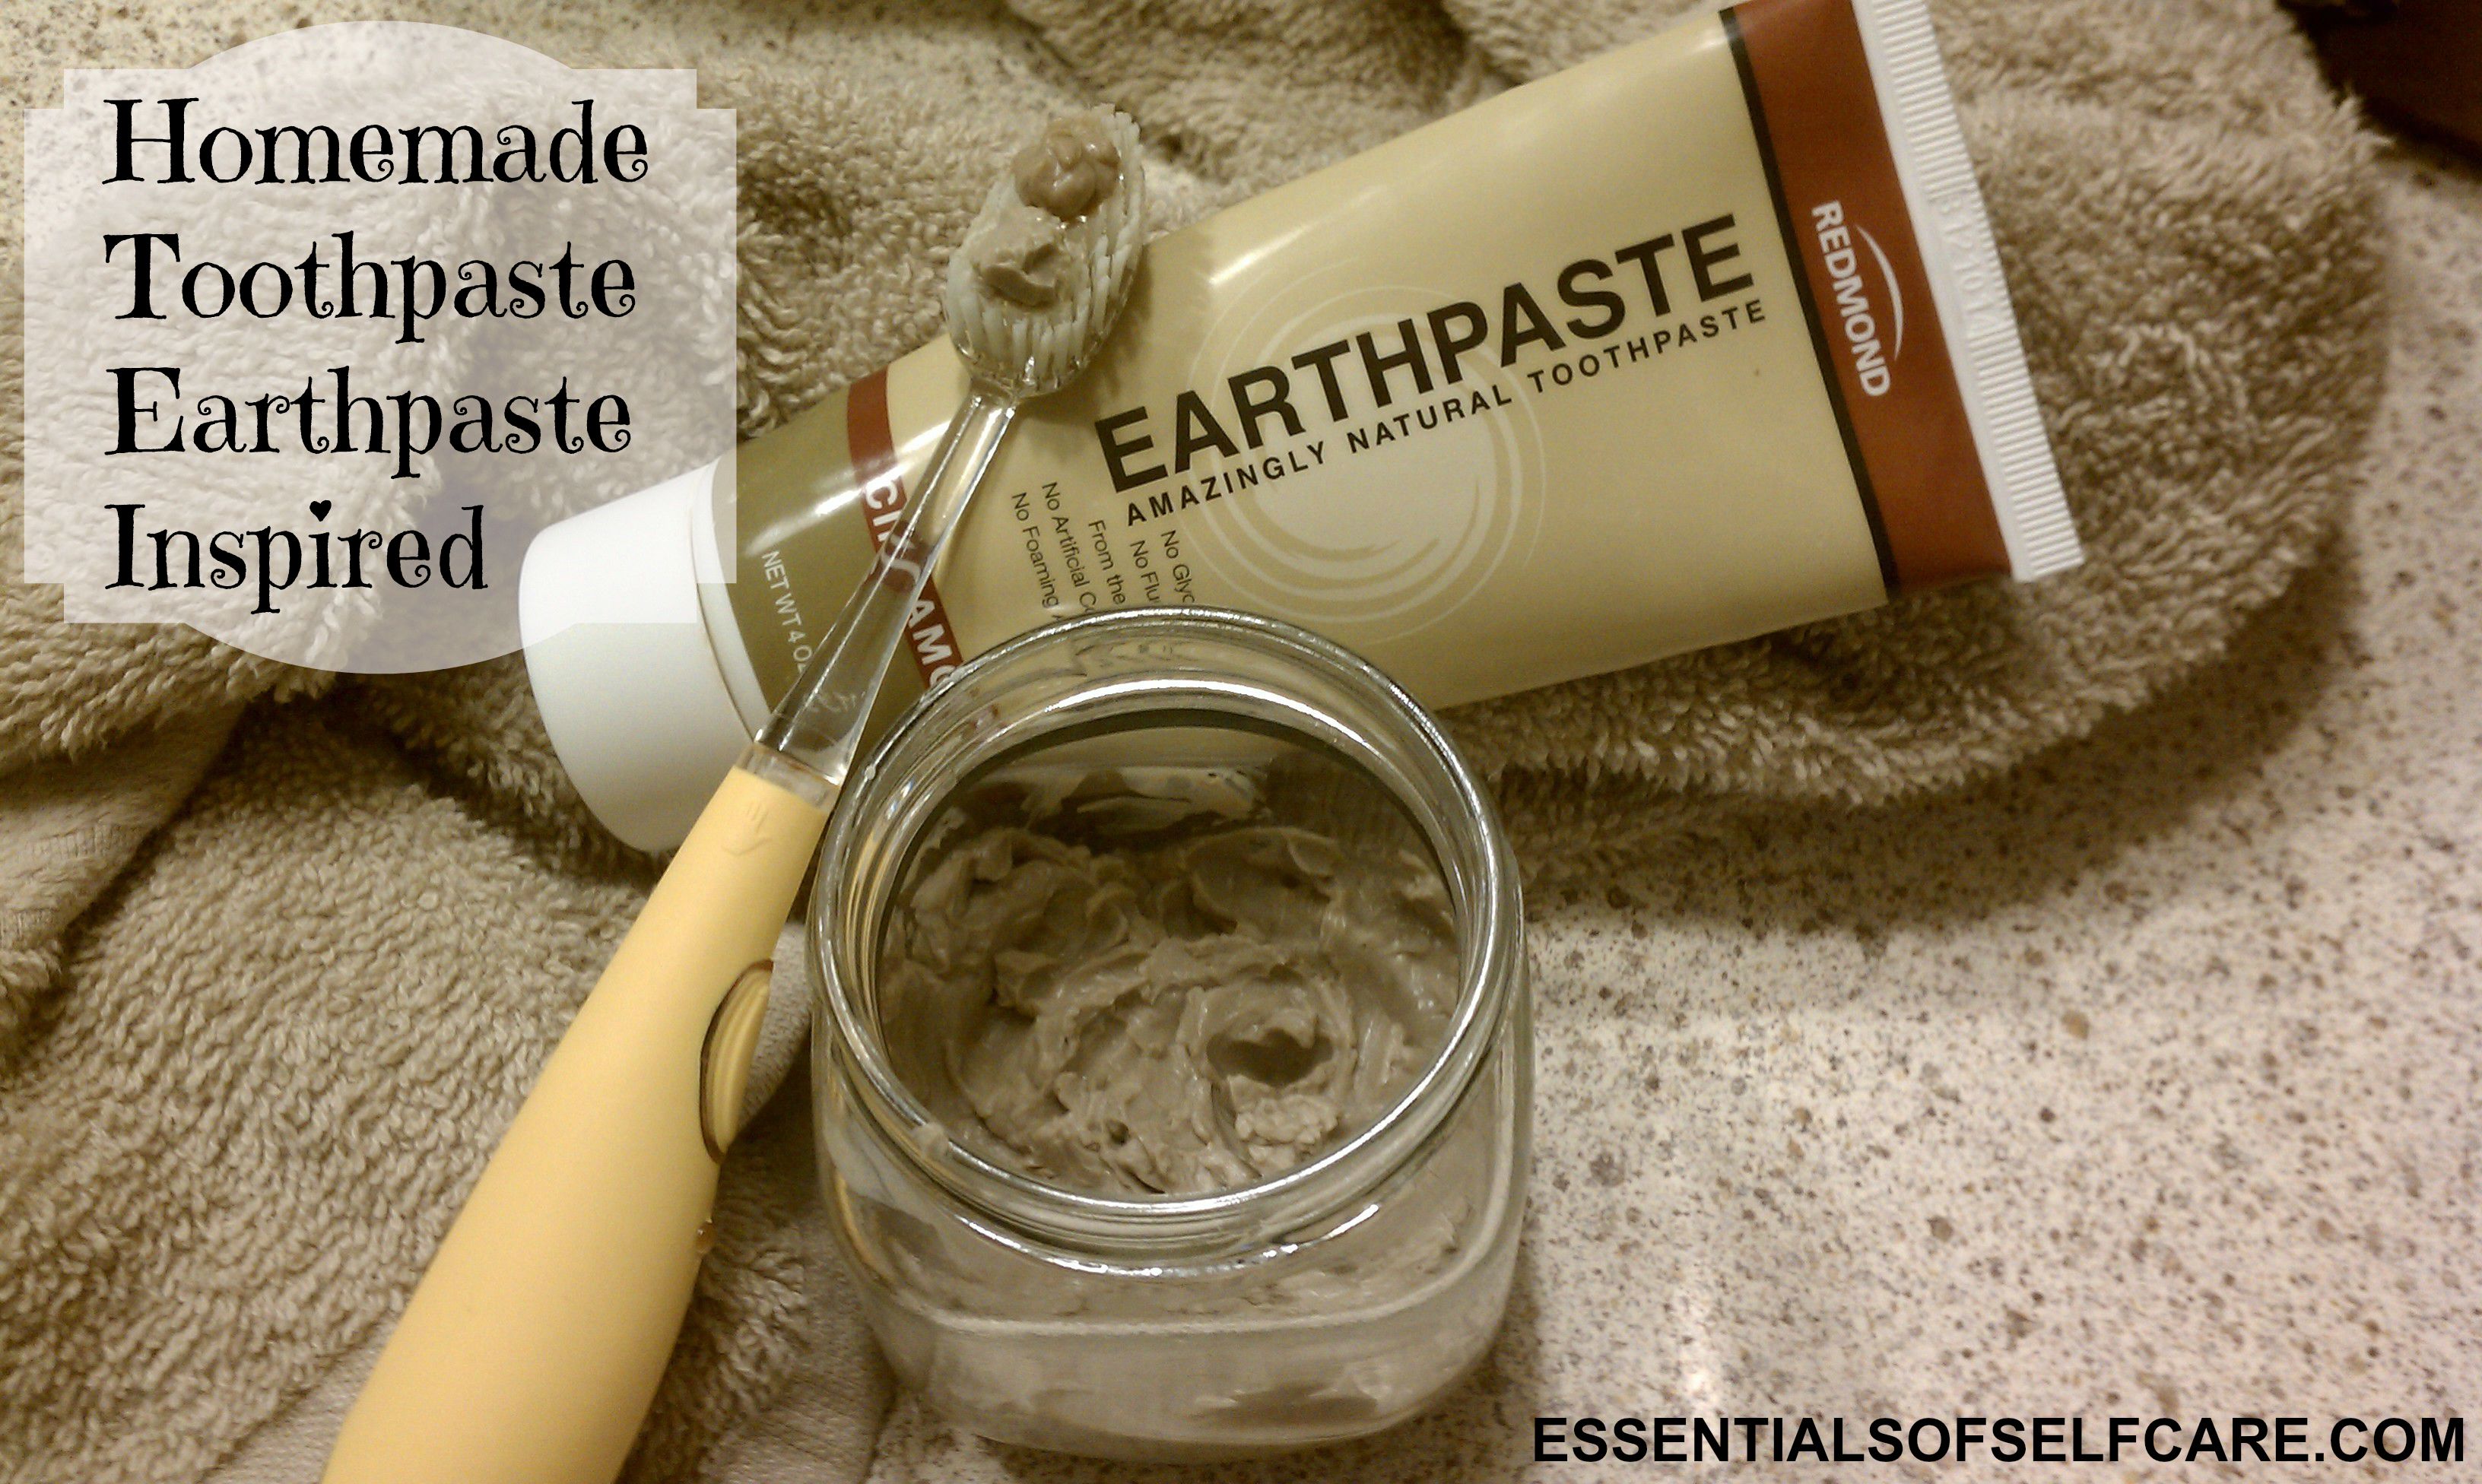 How to Make Homemade Toothpaste – ‘Earthpaste’ Inspired